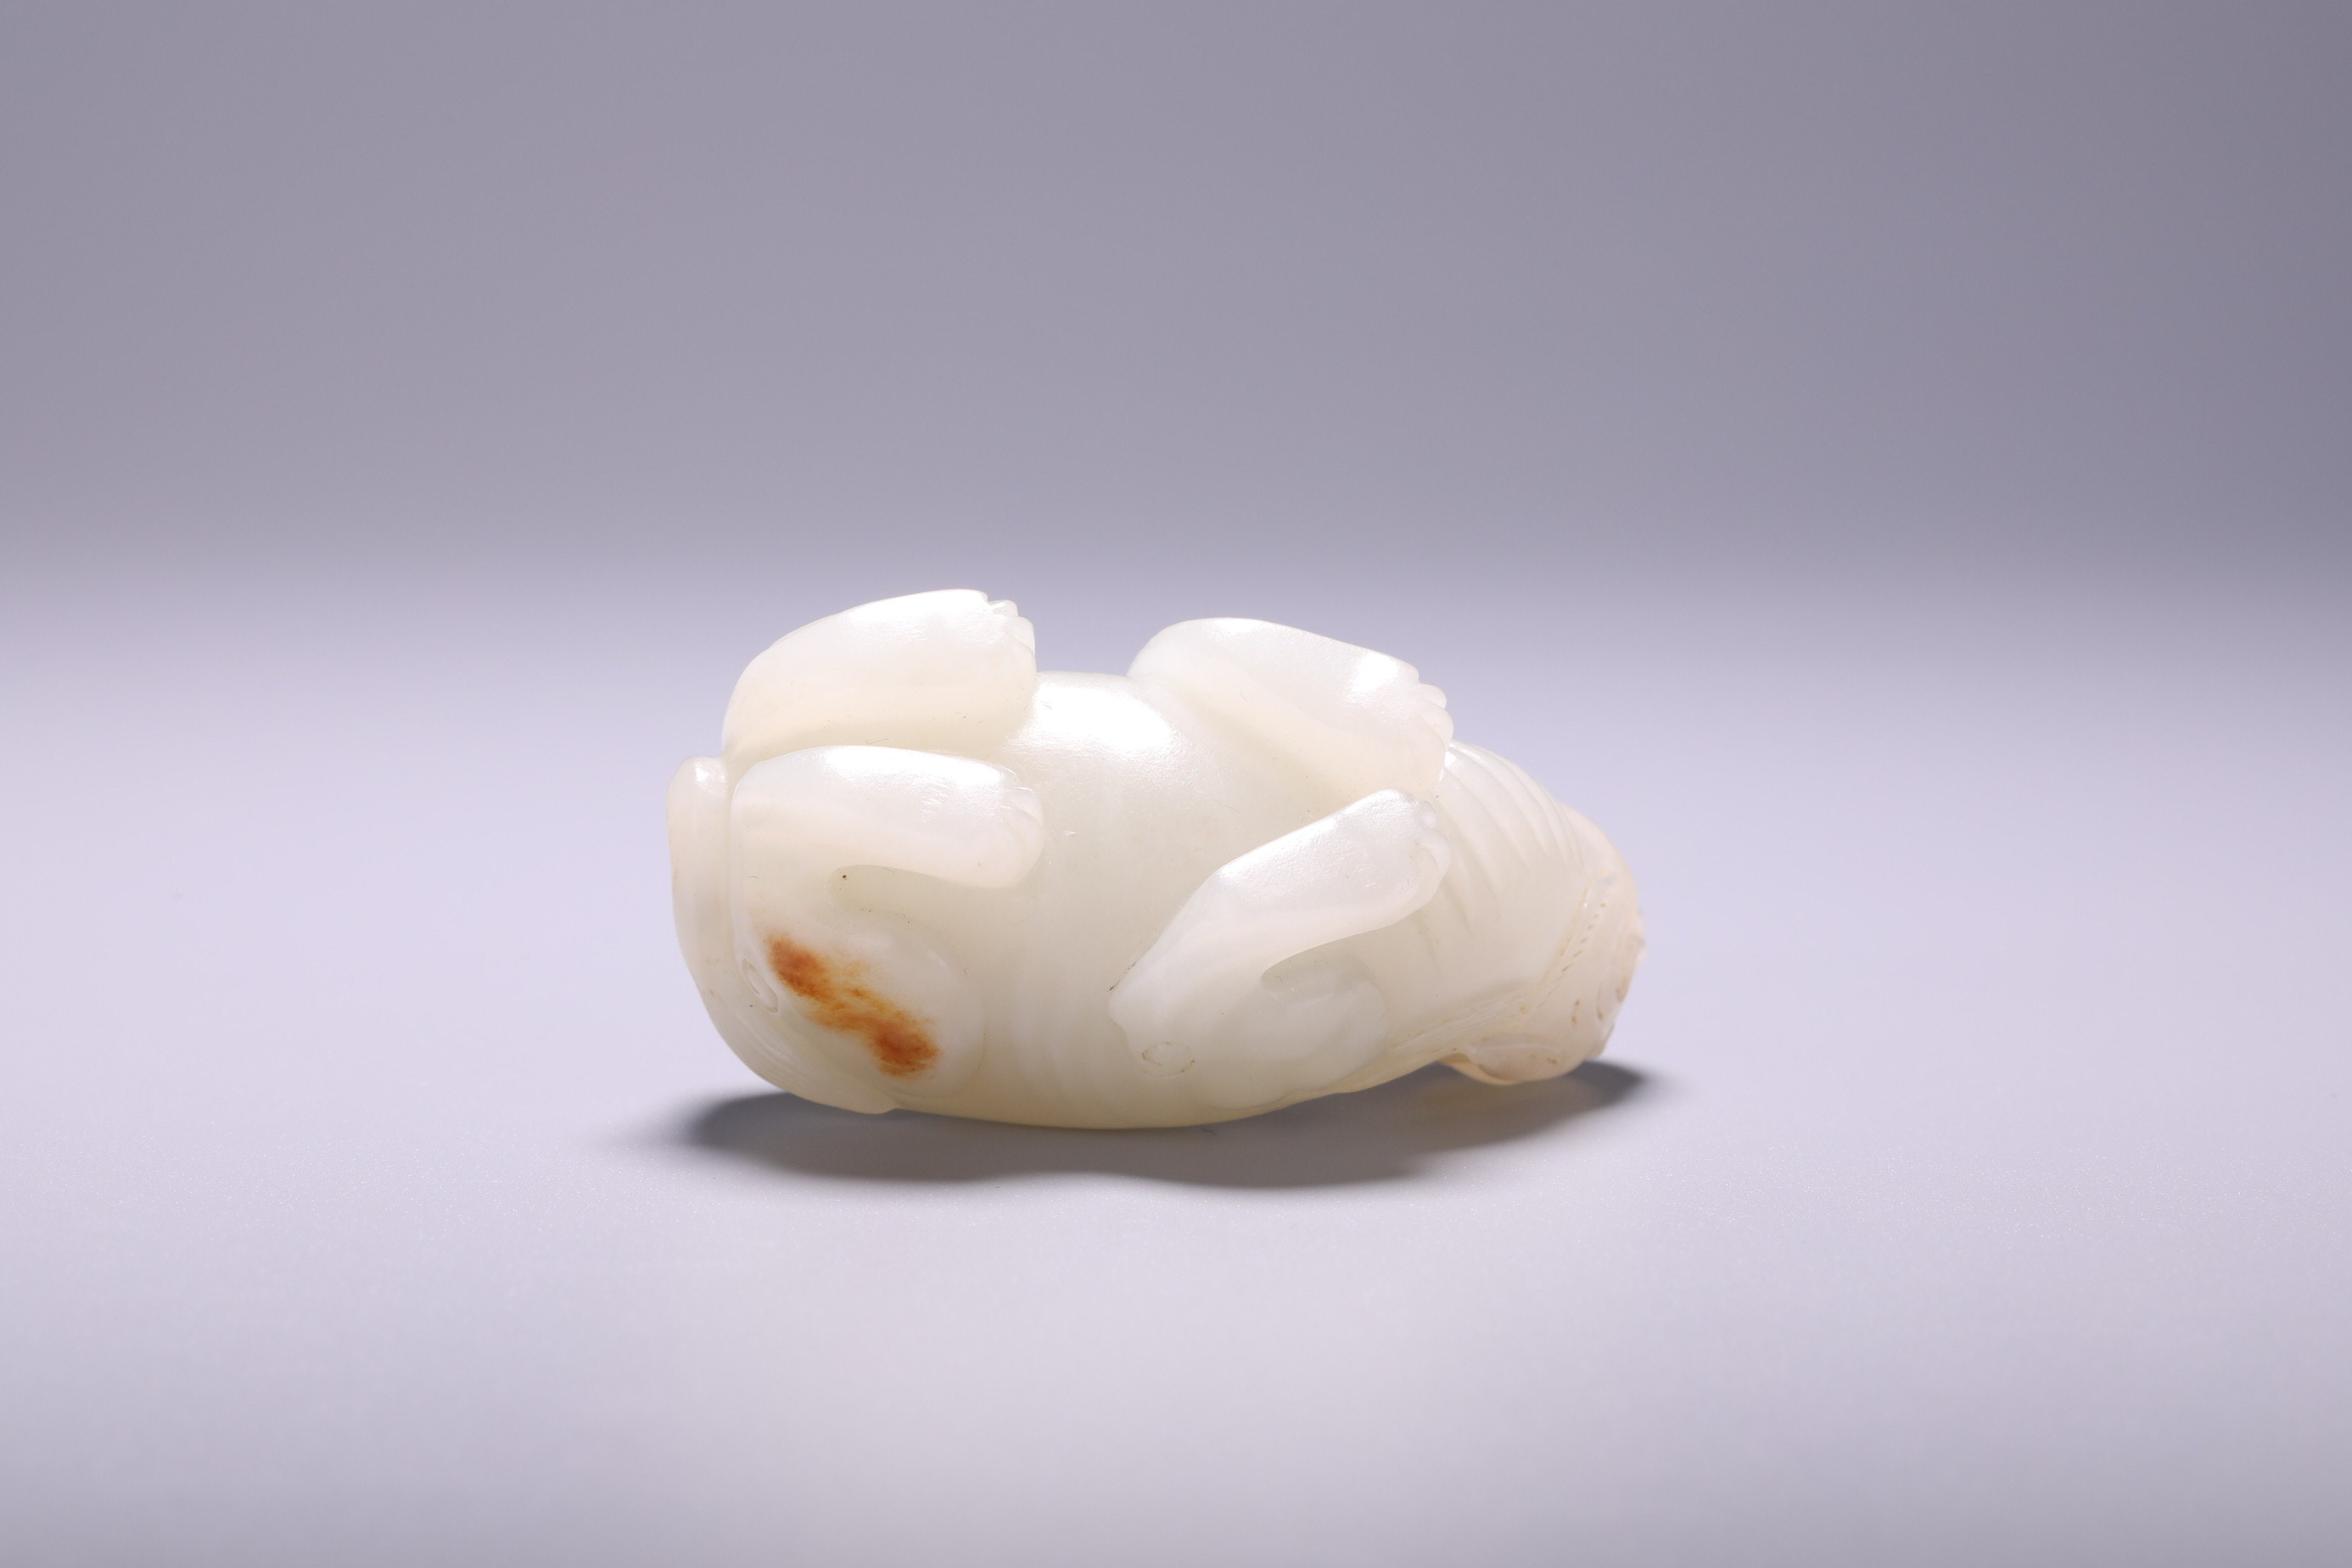 A Chinese jade 'Mythical Beast' carving, L 6,5 - H 3,5 cm - Image 3 of 3